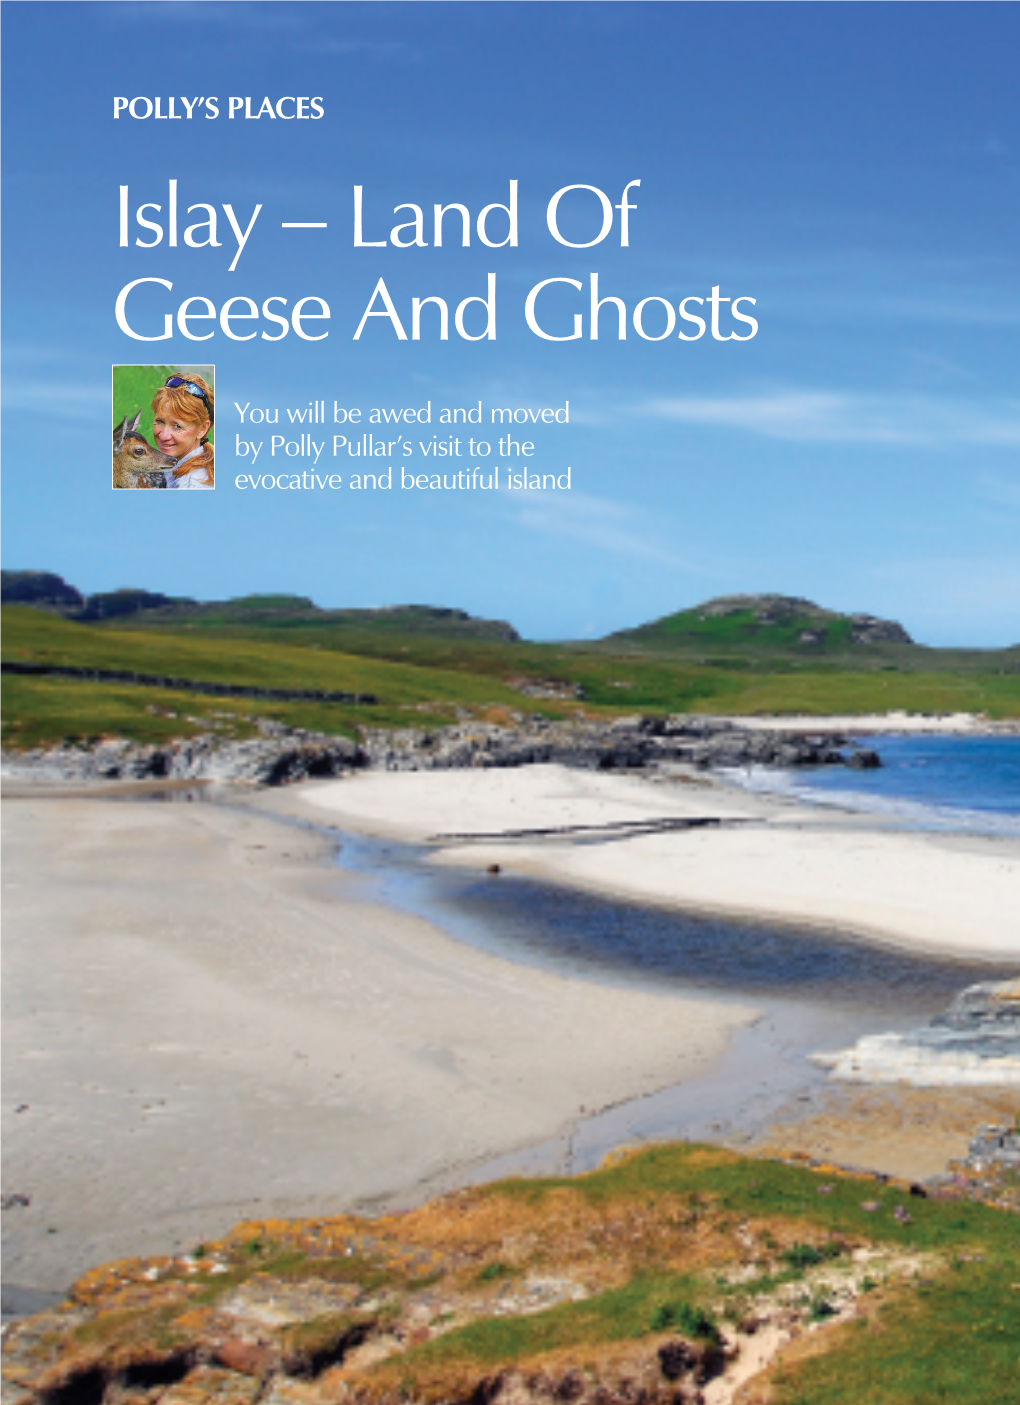 Islay – Land of Geese and Ghosts